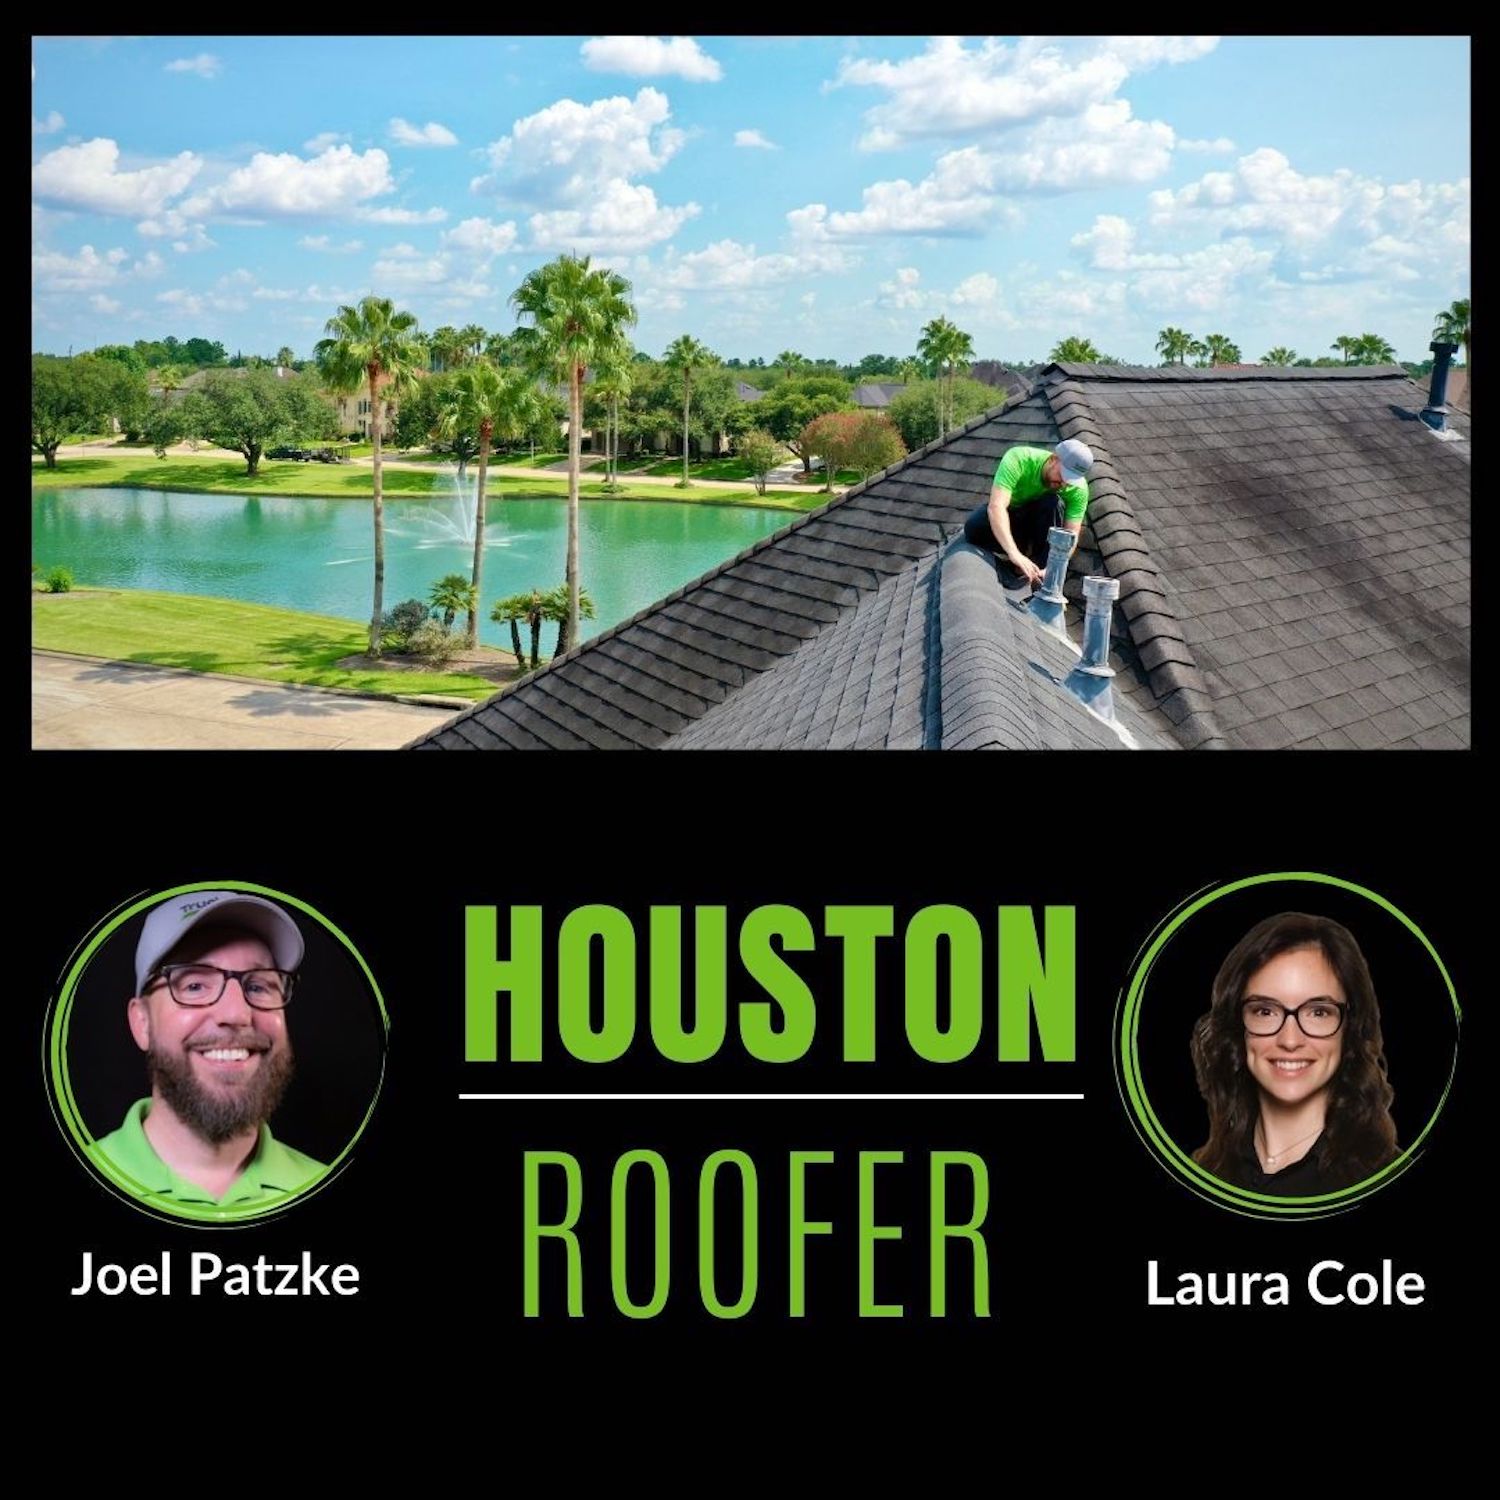 Trueworks Roofing Works with United Airlines to Apply Ecodur Roof Coating for Repairs with Joel Patzke